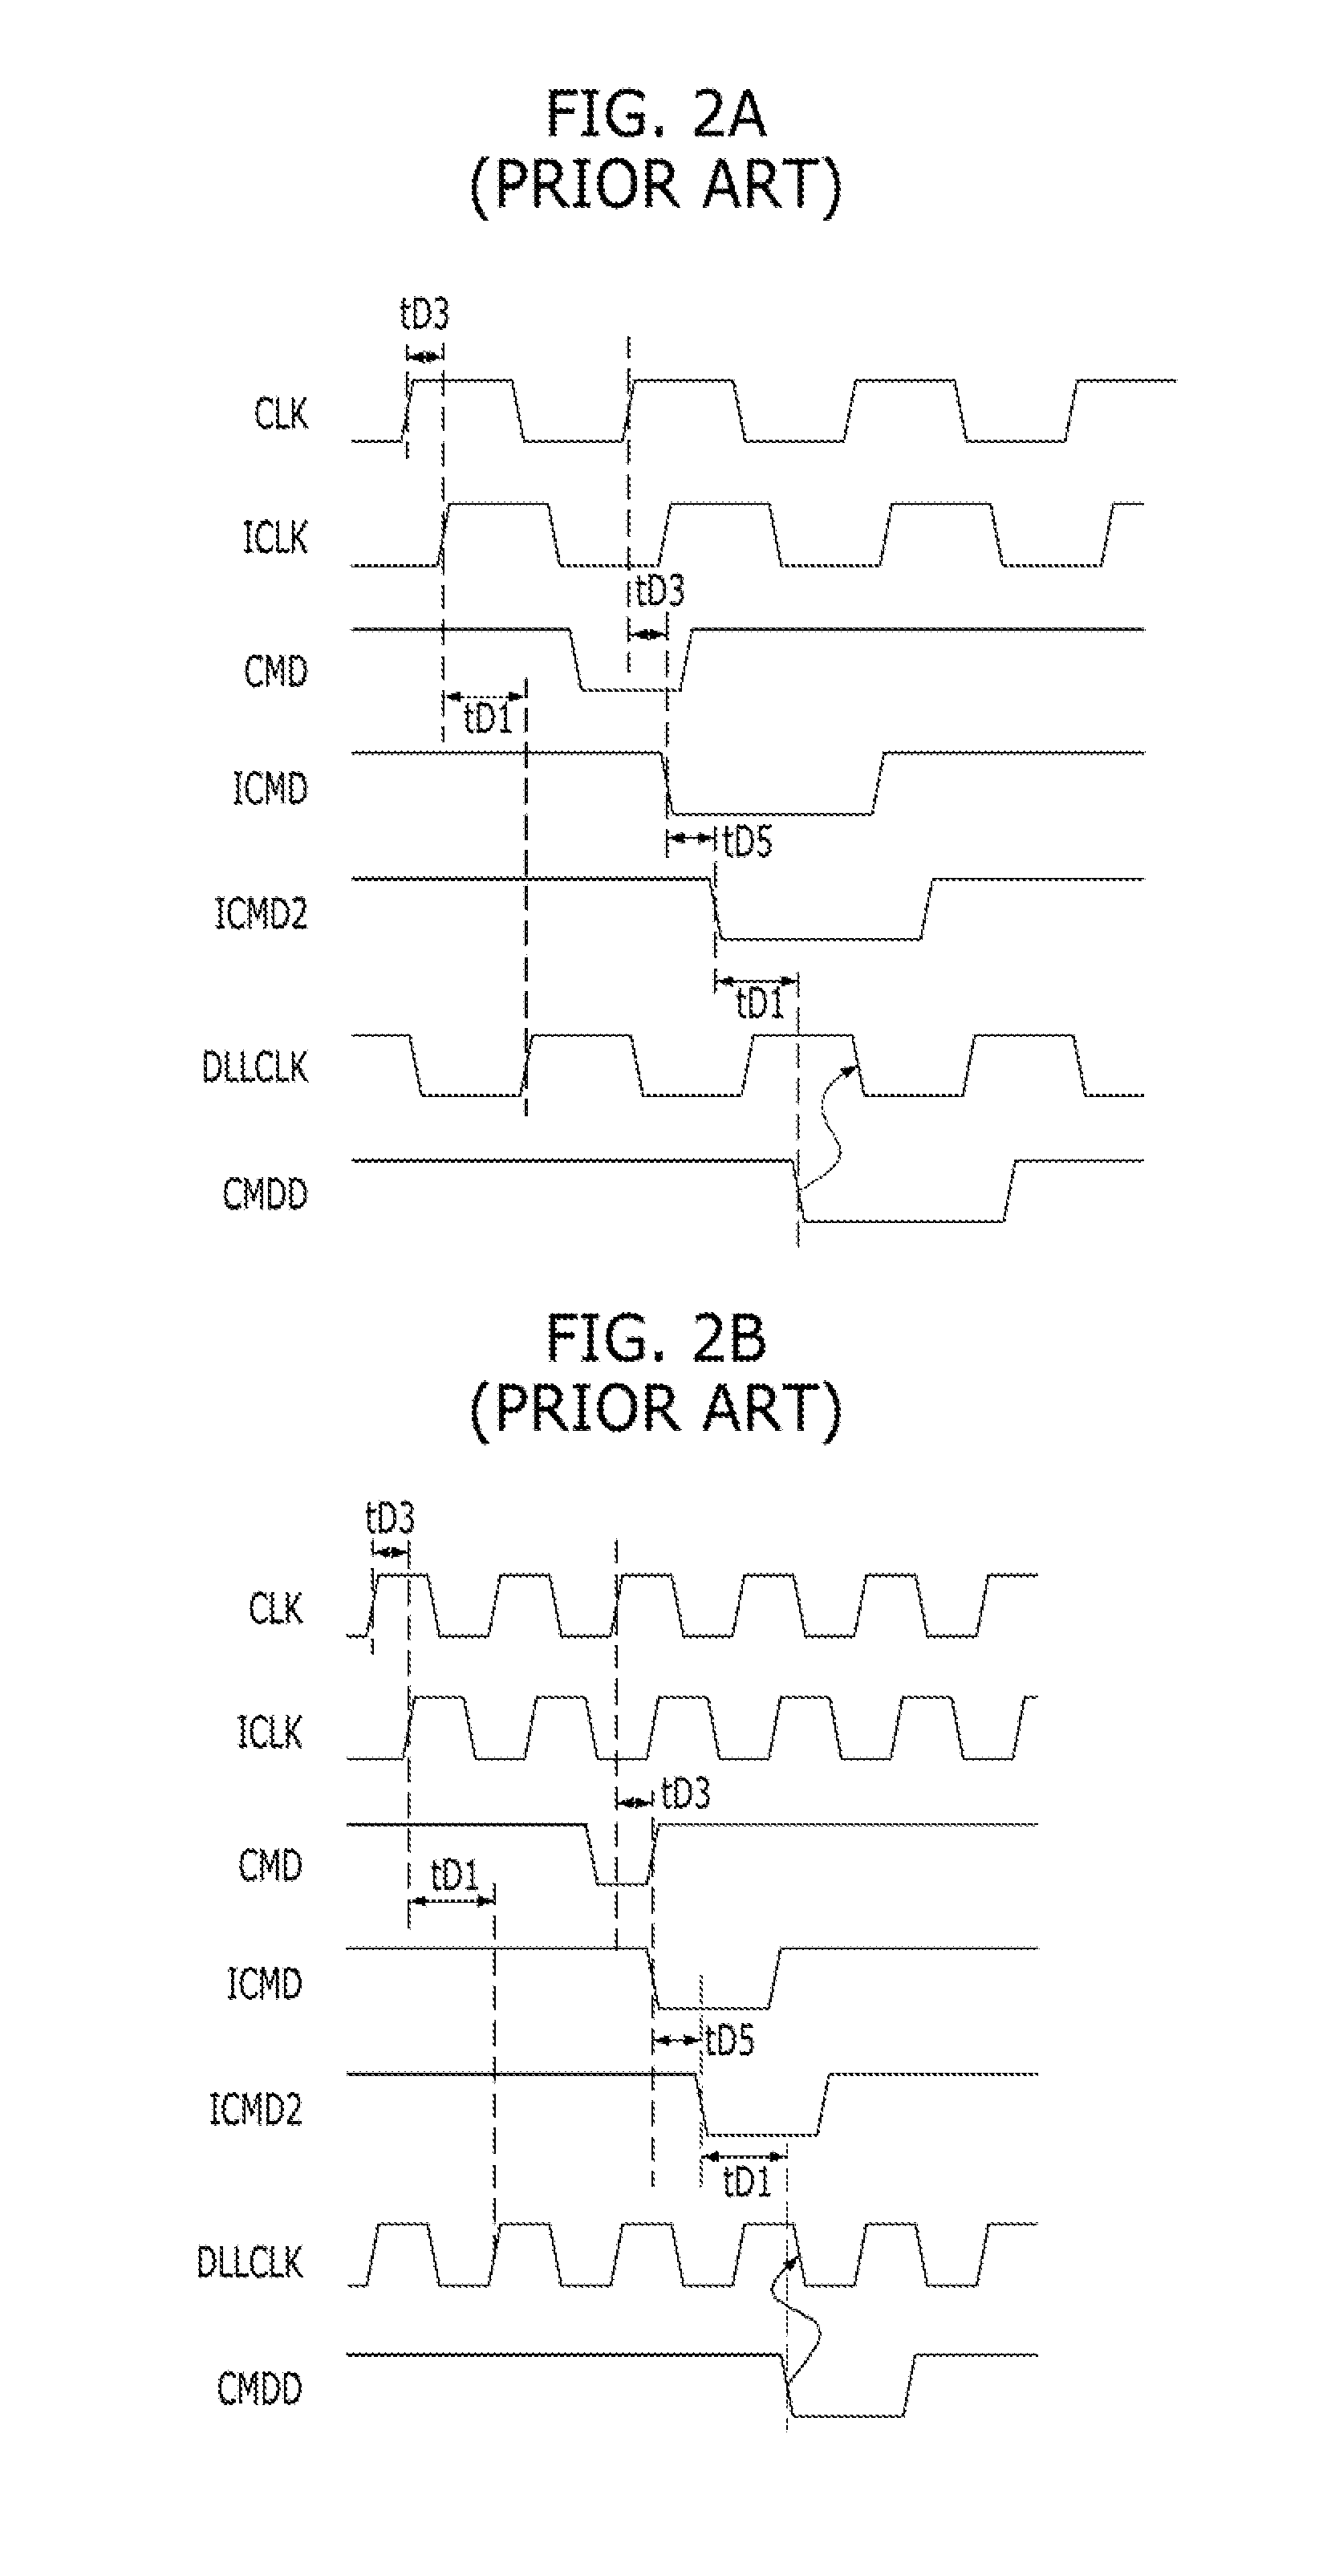 Synchronous semiconductor device having delay locked loop for latency control